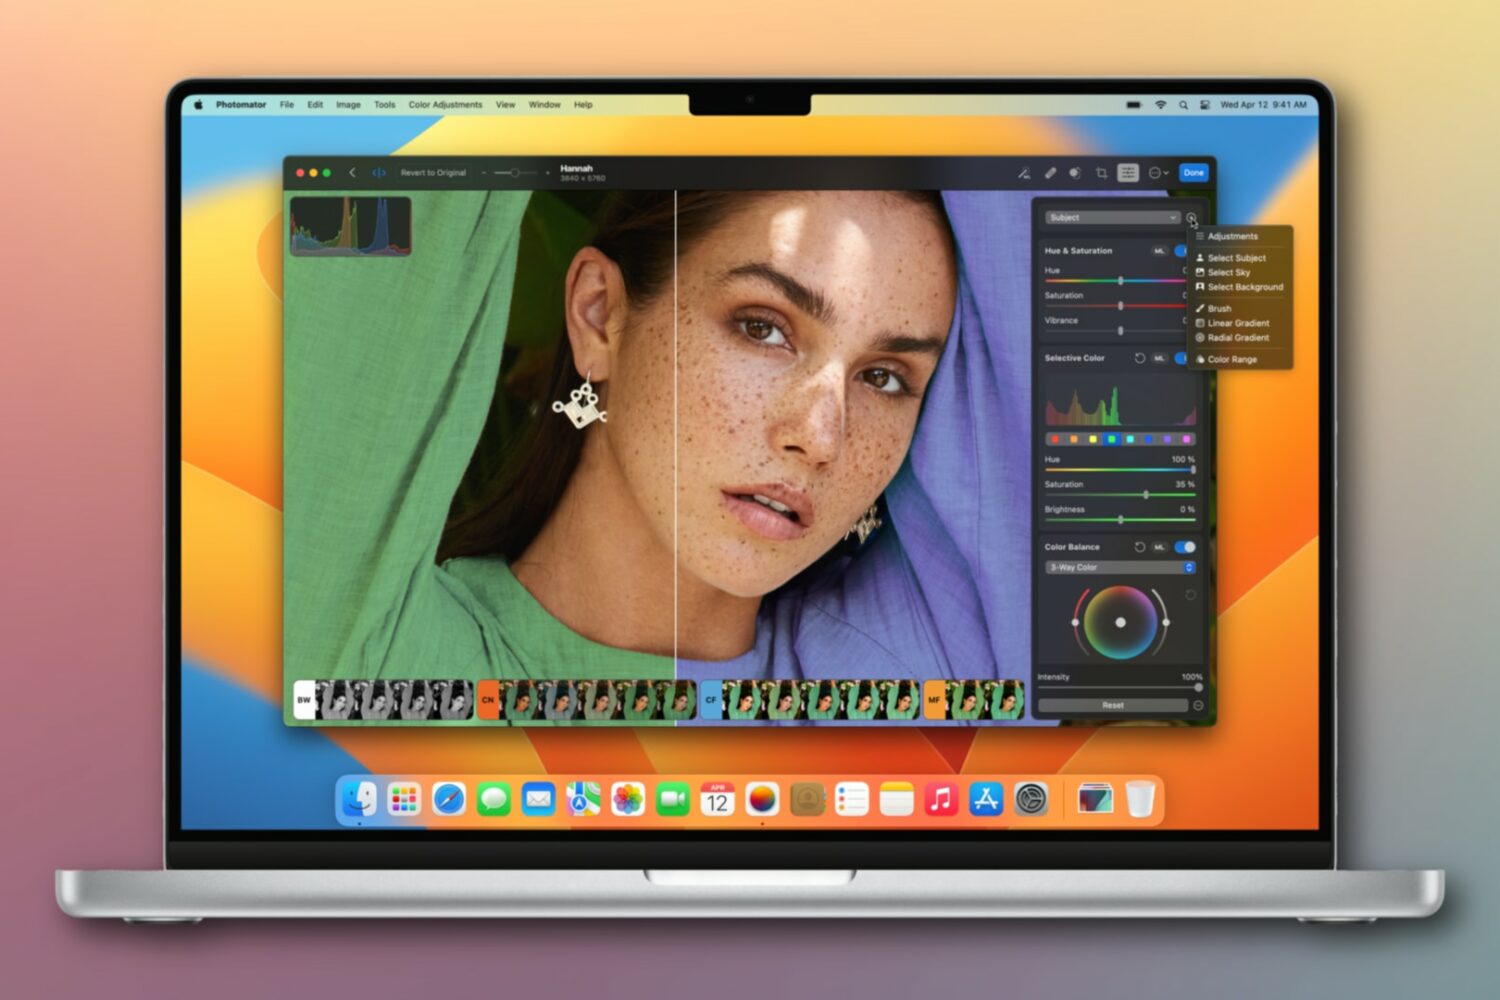 Making color adjustments in Photomator for Mac